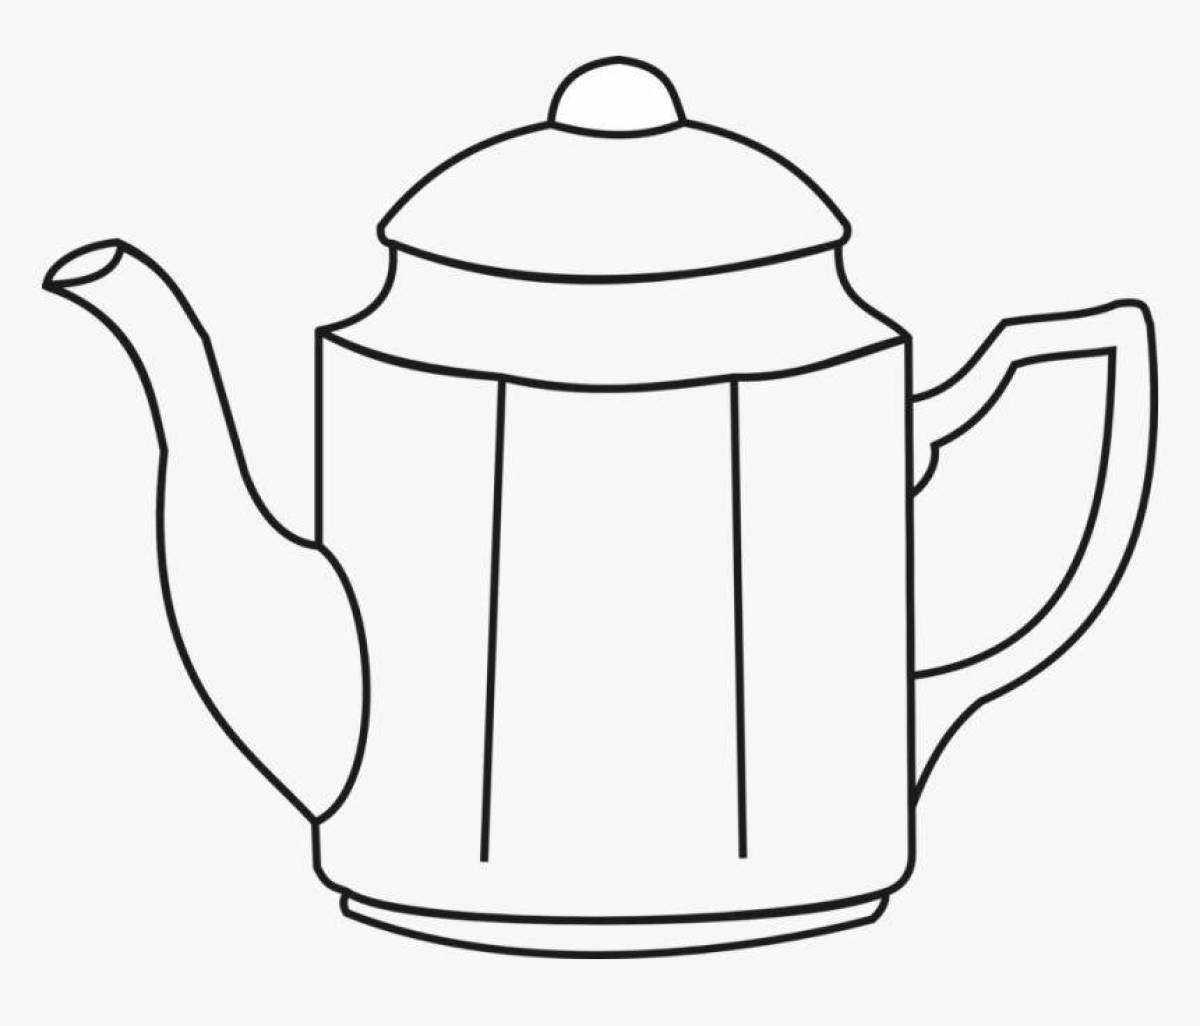 Cute teapot coloring page for kids